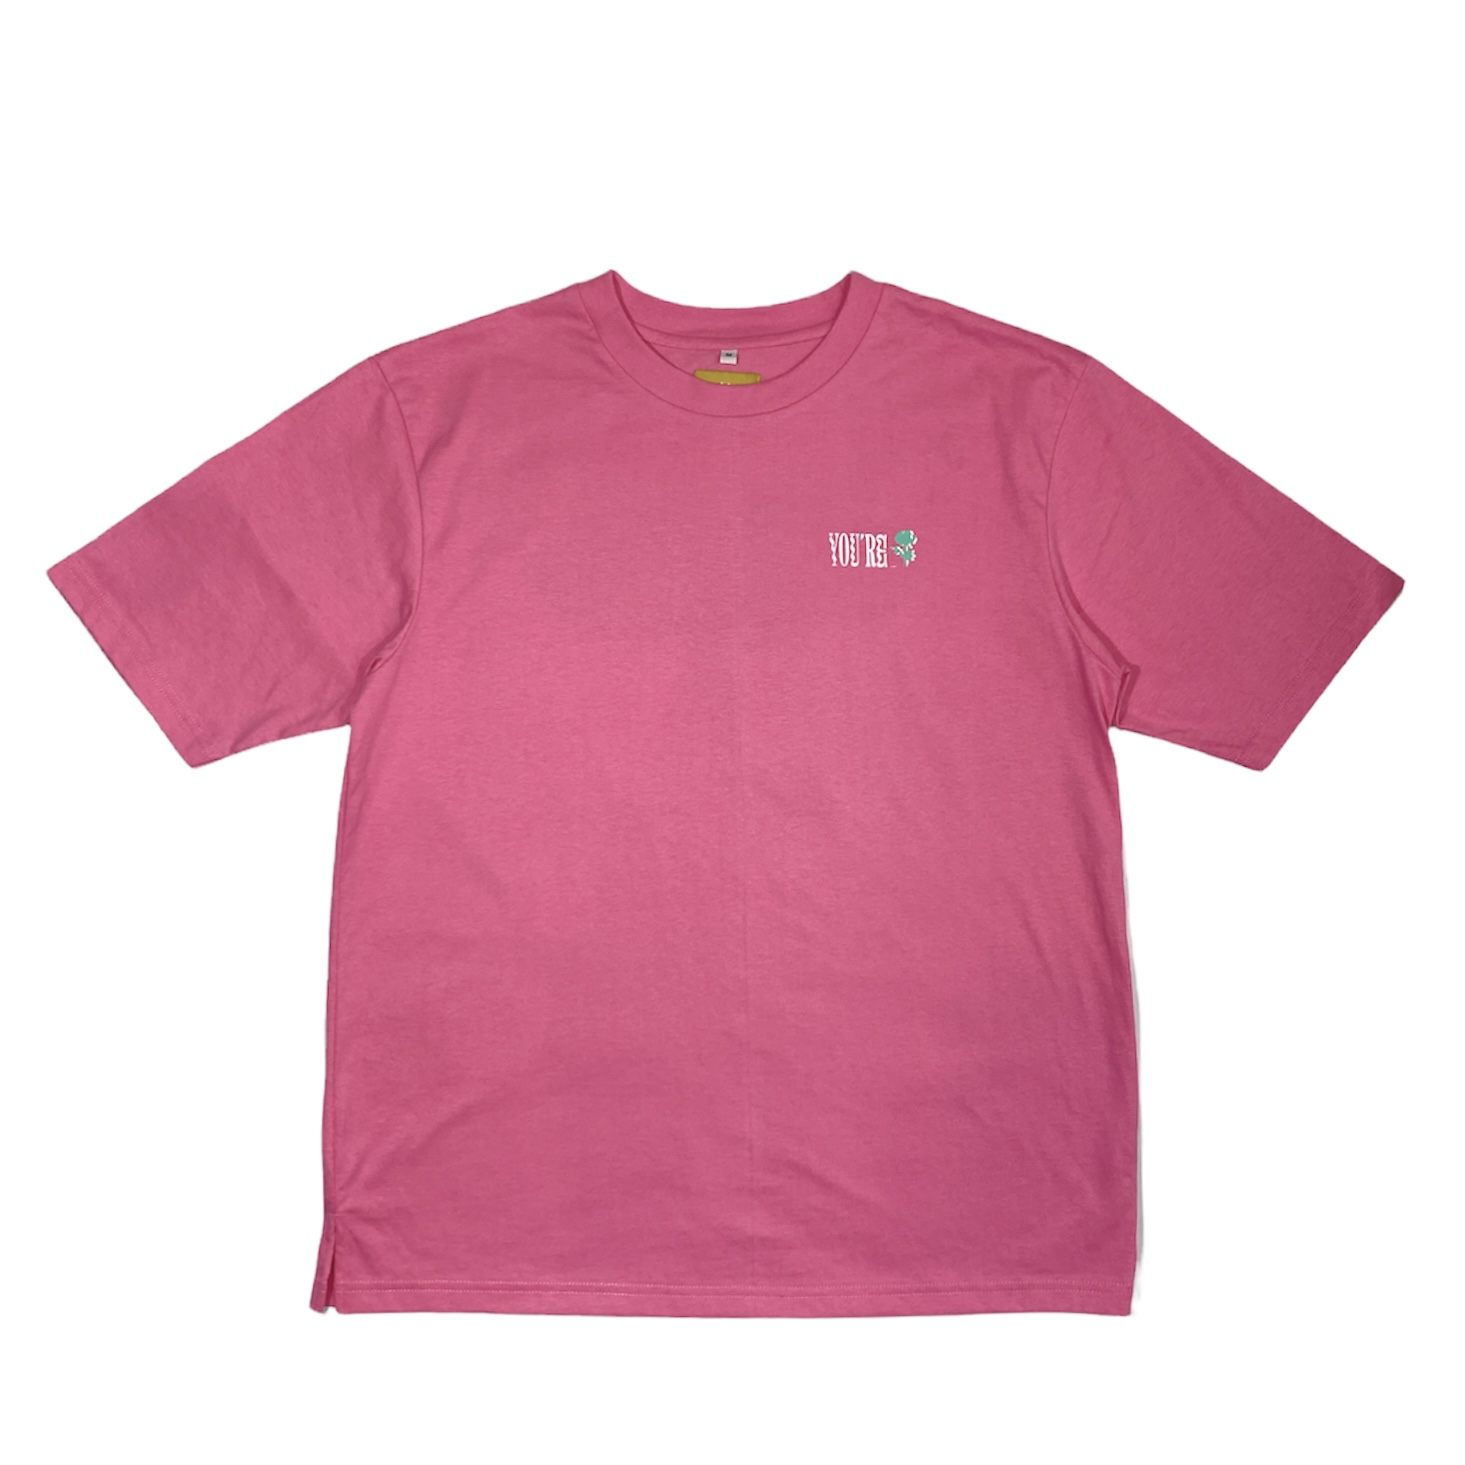 You' re one of a kind Tee (Pink)